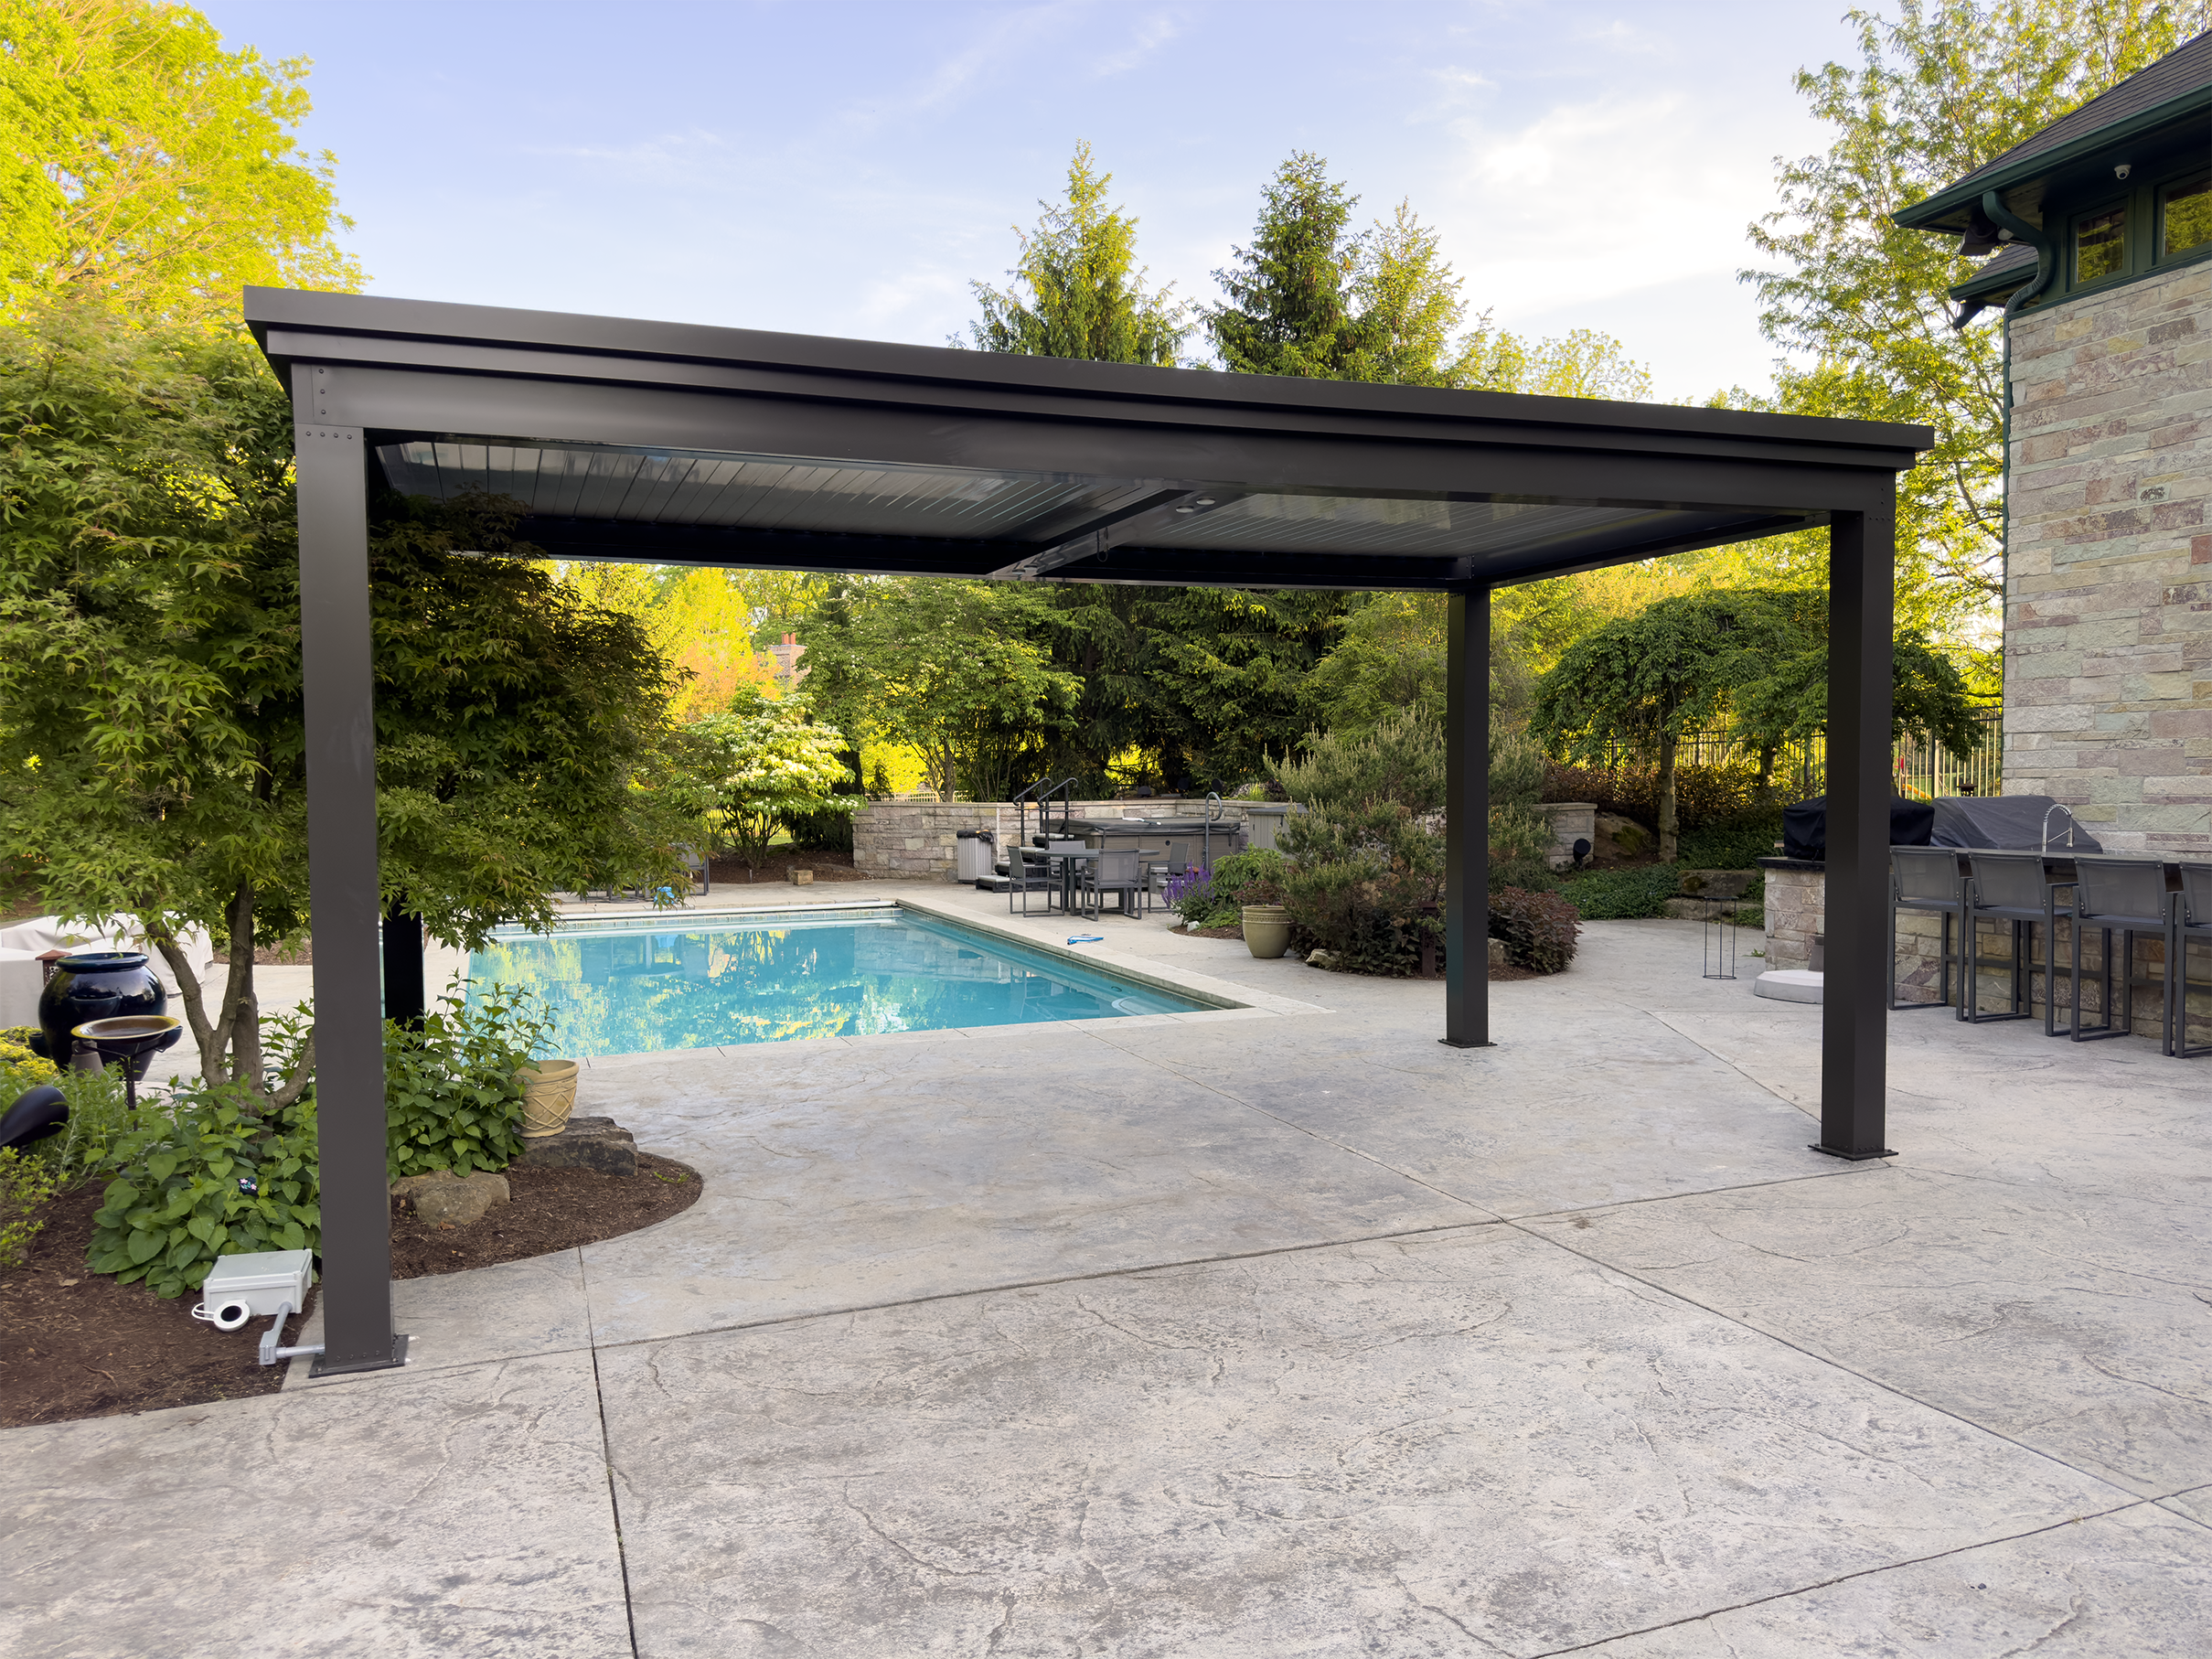 Beautiful Pergola Next To Pool At A Luxury Home (The Popular Luxury Item)